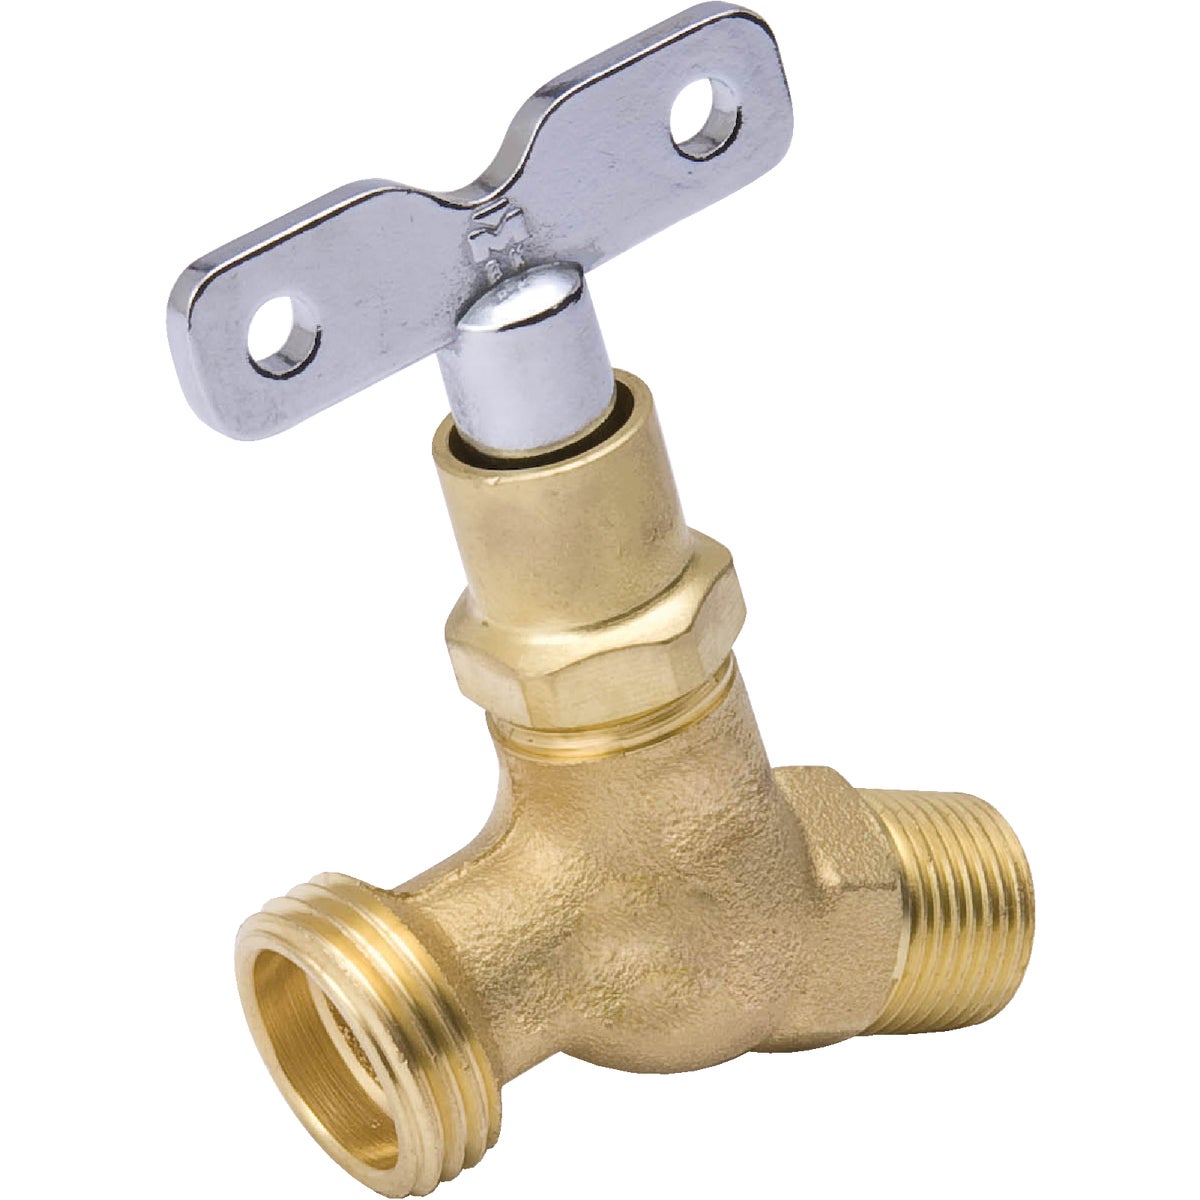 Item 404384, B &amp; K loose key hose bibb valve for use with water or oil.